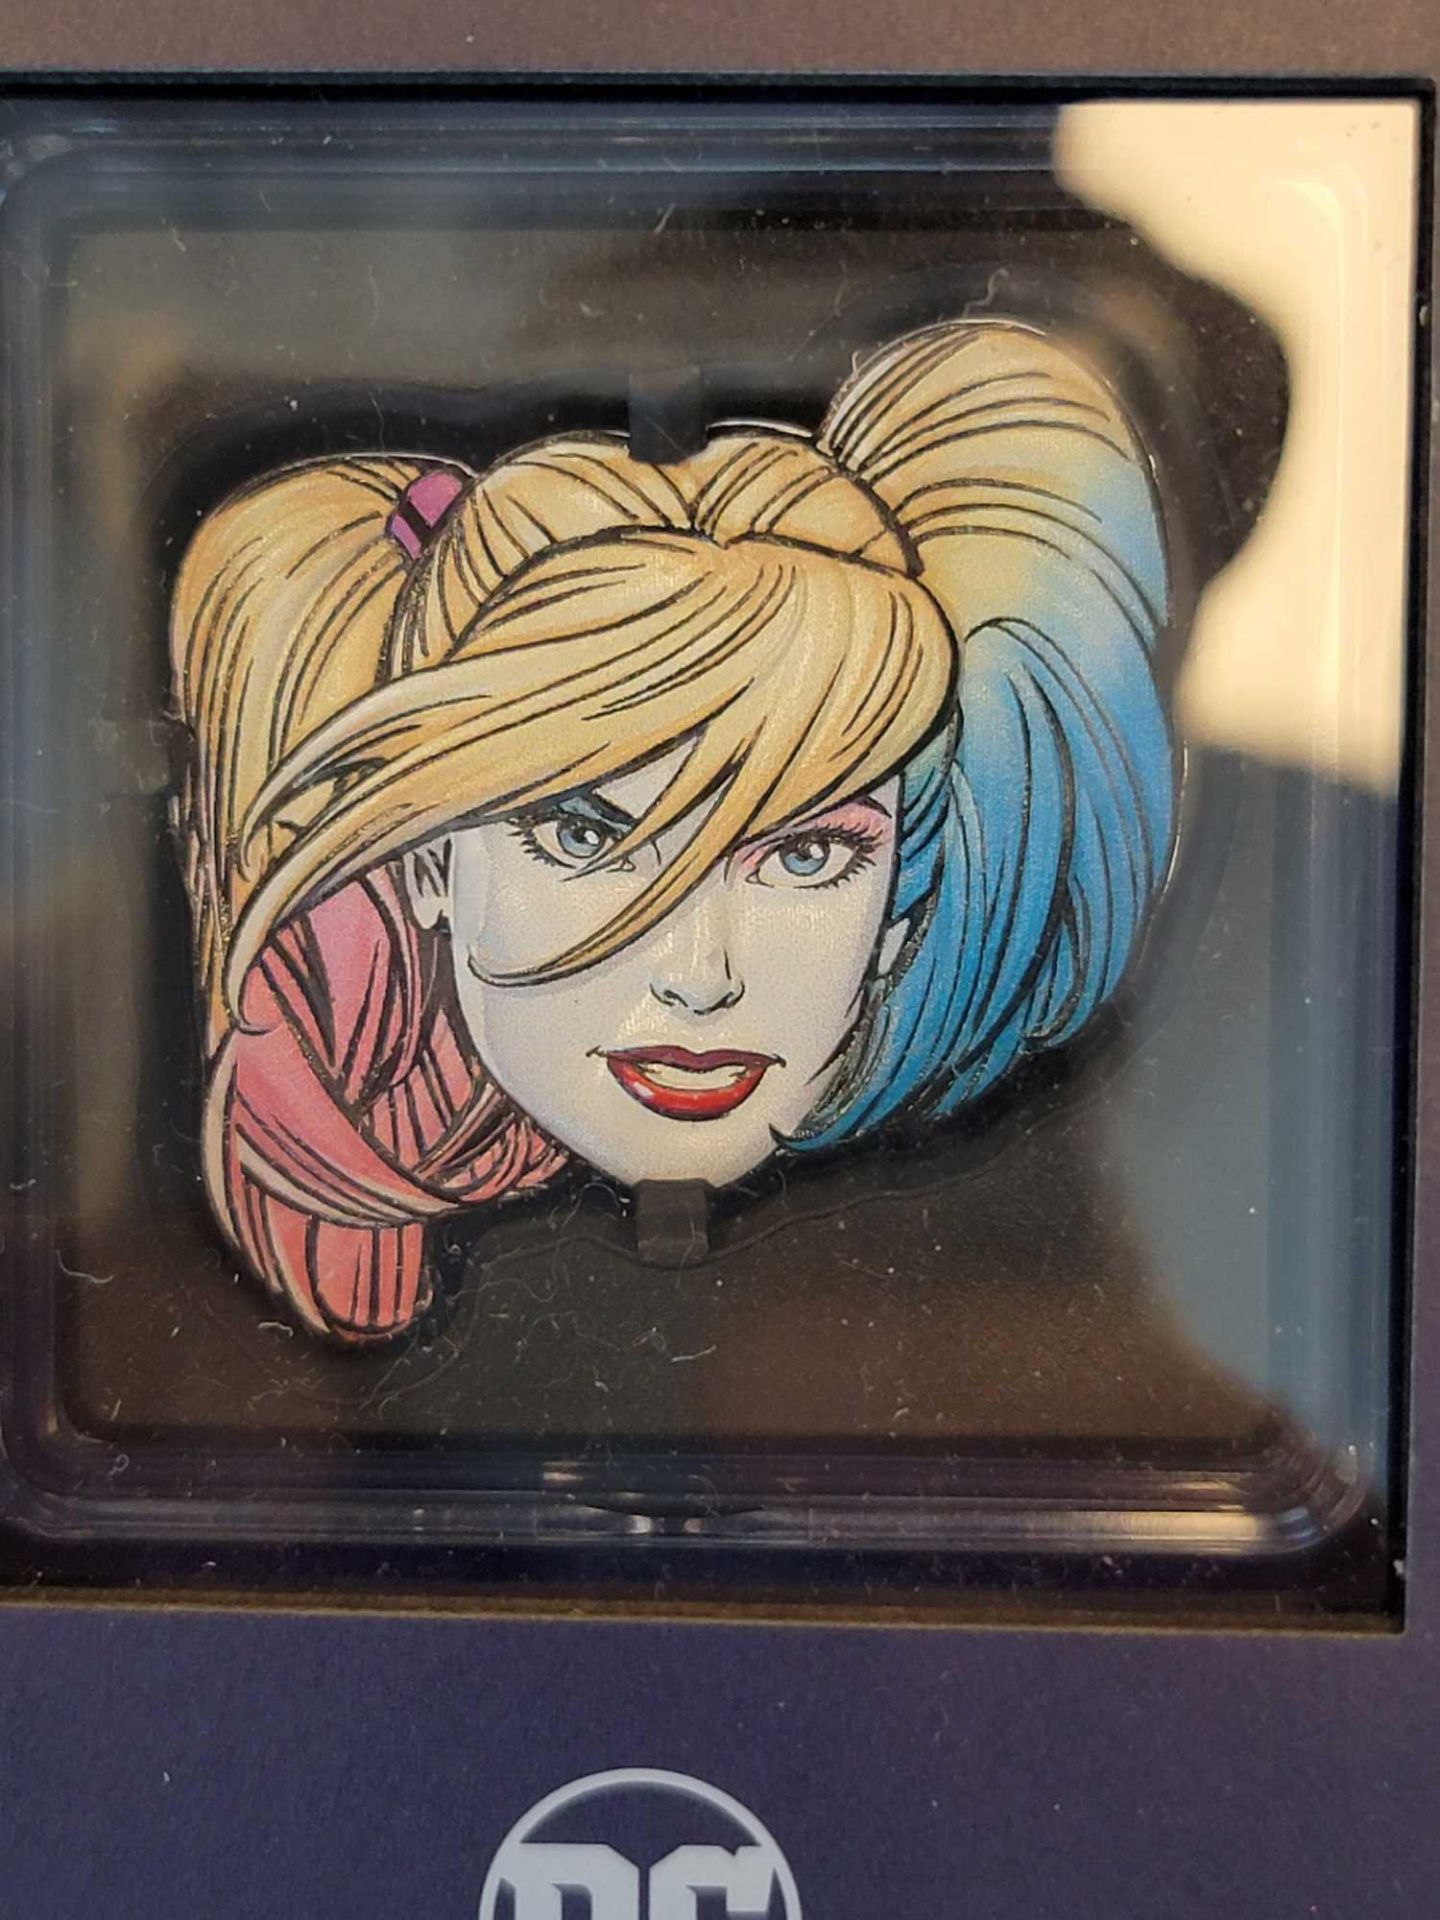 Faces of Gotham - Harley Quinn 1 oz Silver Collectible Coin - Image 2 of 12